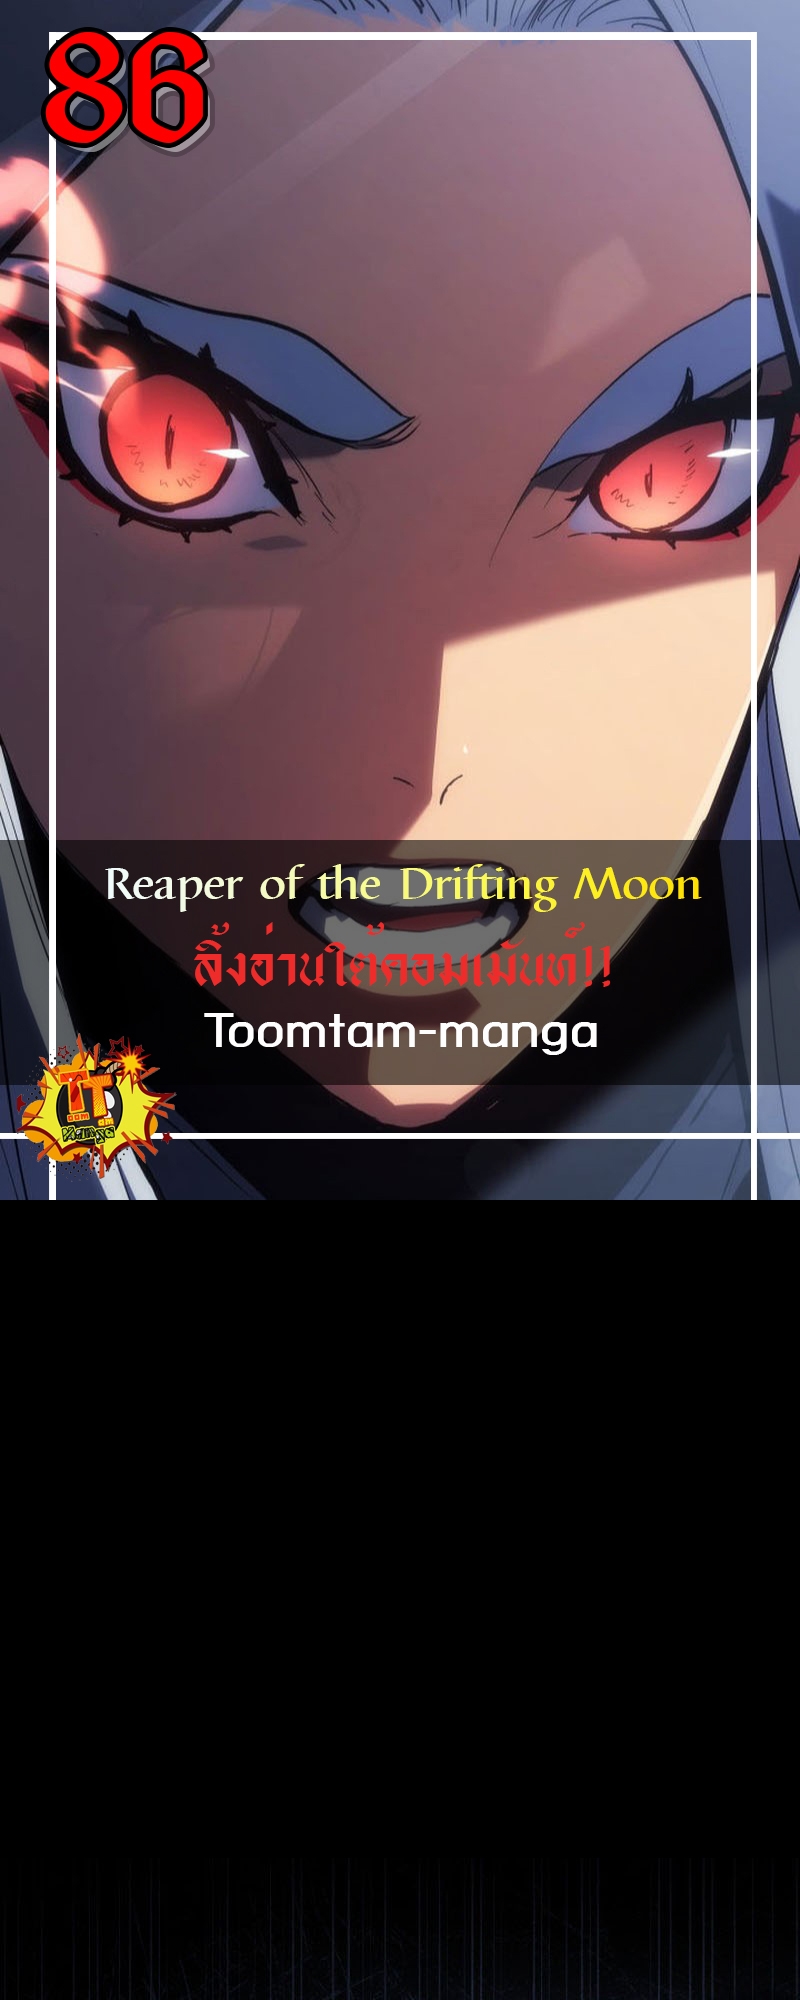 Reaper of the Drifting Moon 86 2 05 25670001